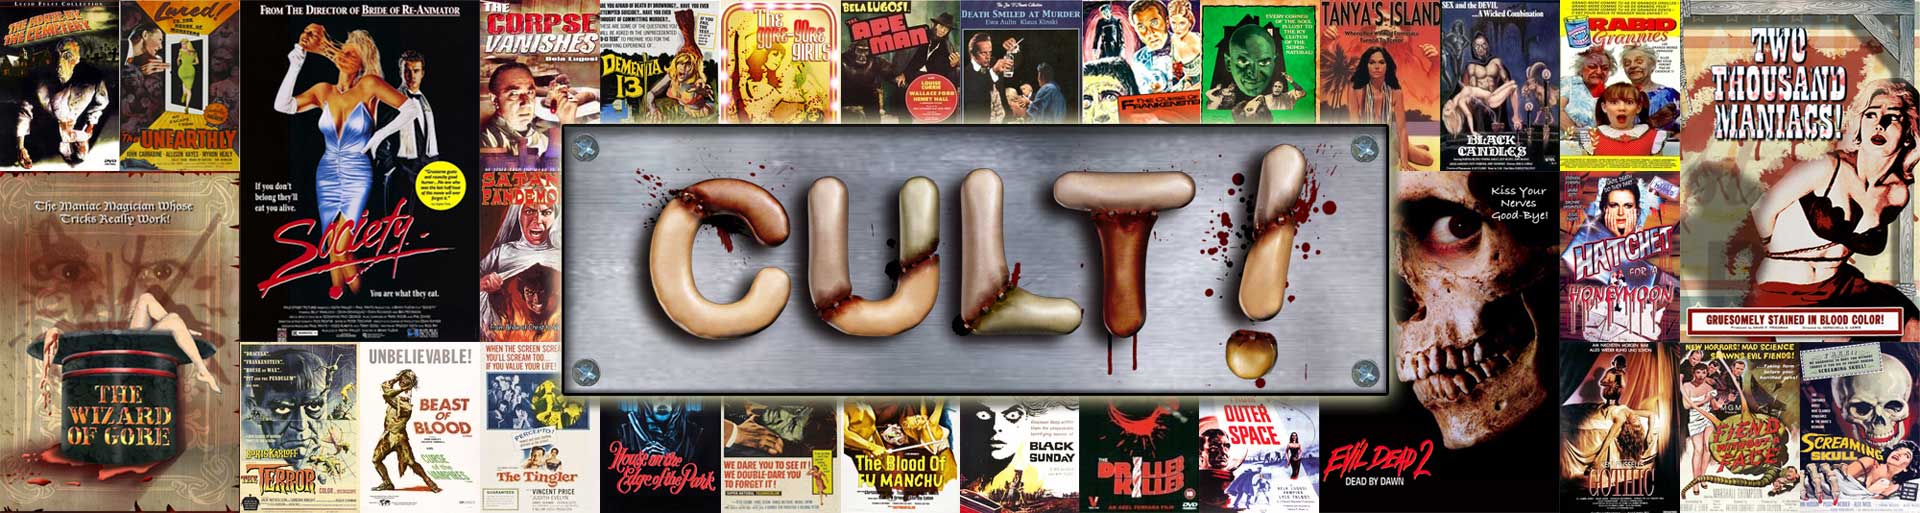 Watch Cult Movies